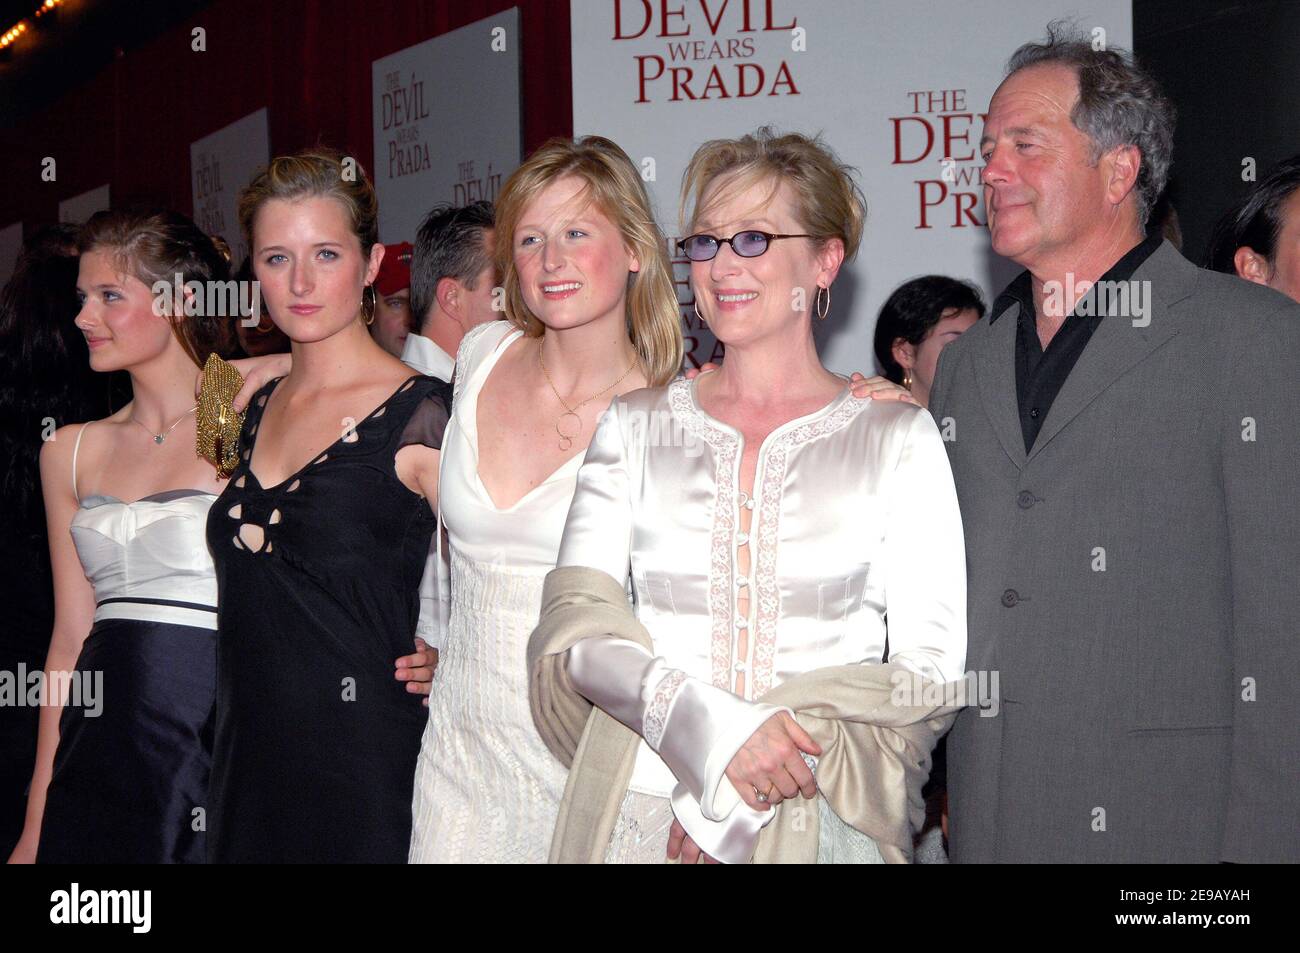 Actress Meryl Streep and her daughters attend the 20th Century Fox premiere  of The Devil Wears Prada held at the Loews Lincoln Center Theatre on June  19, 2006 in New York City,